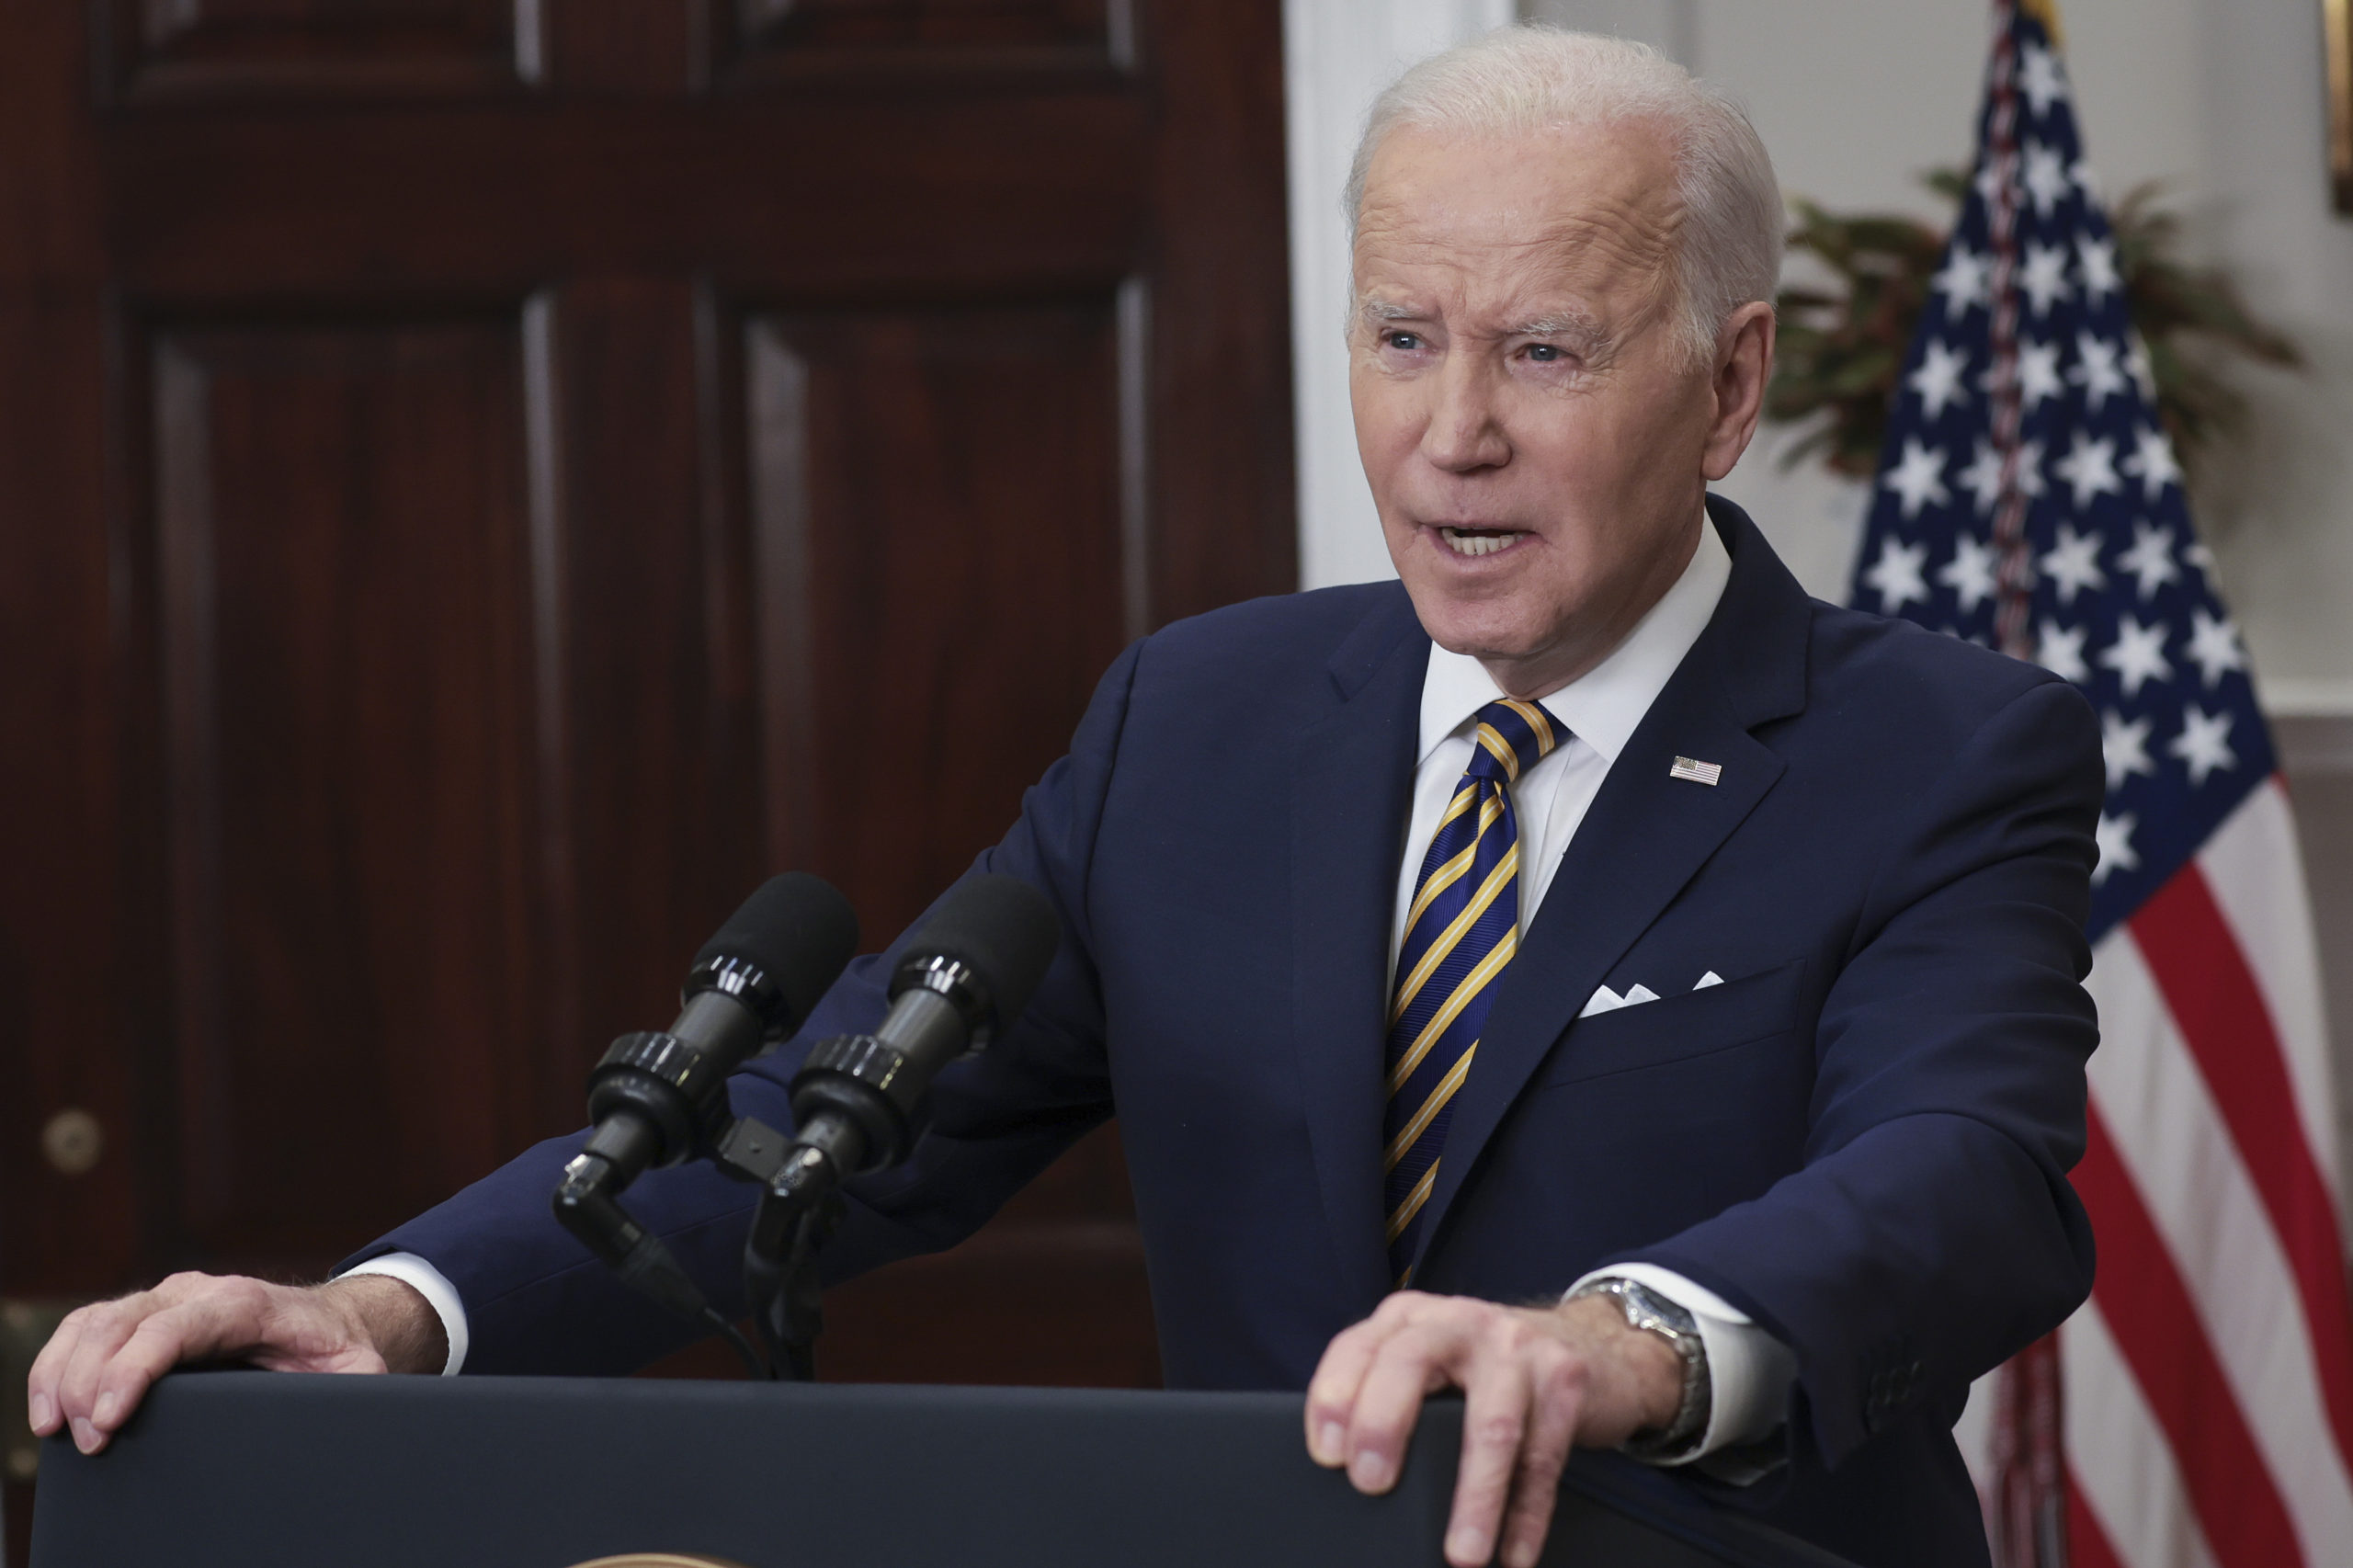 President Joe Biden announces the U.S. will ban Russian oil and petroleum products during a speech on March 8 at the White House. (Win McNamee/Getty Images)